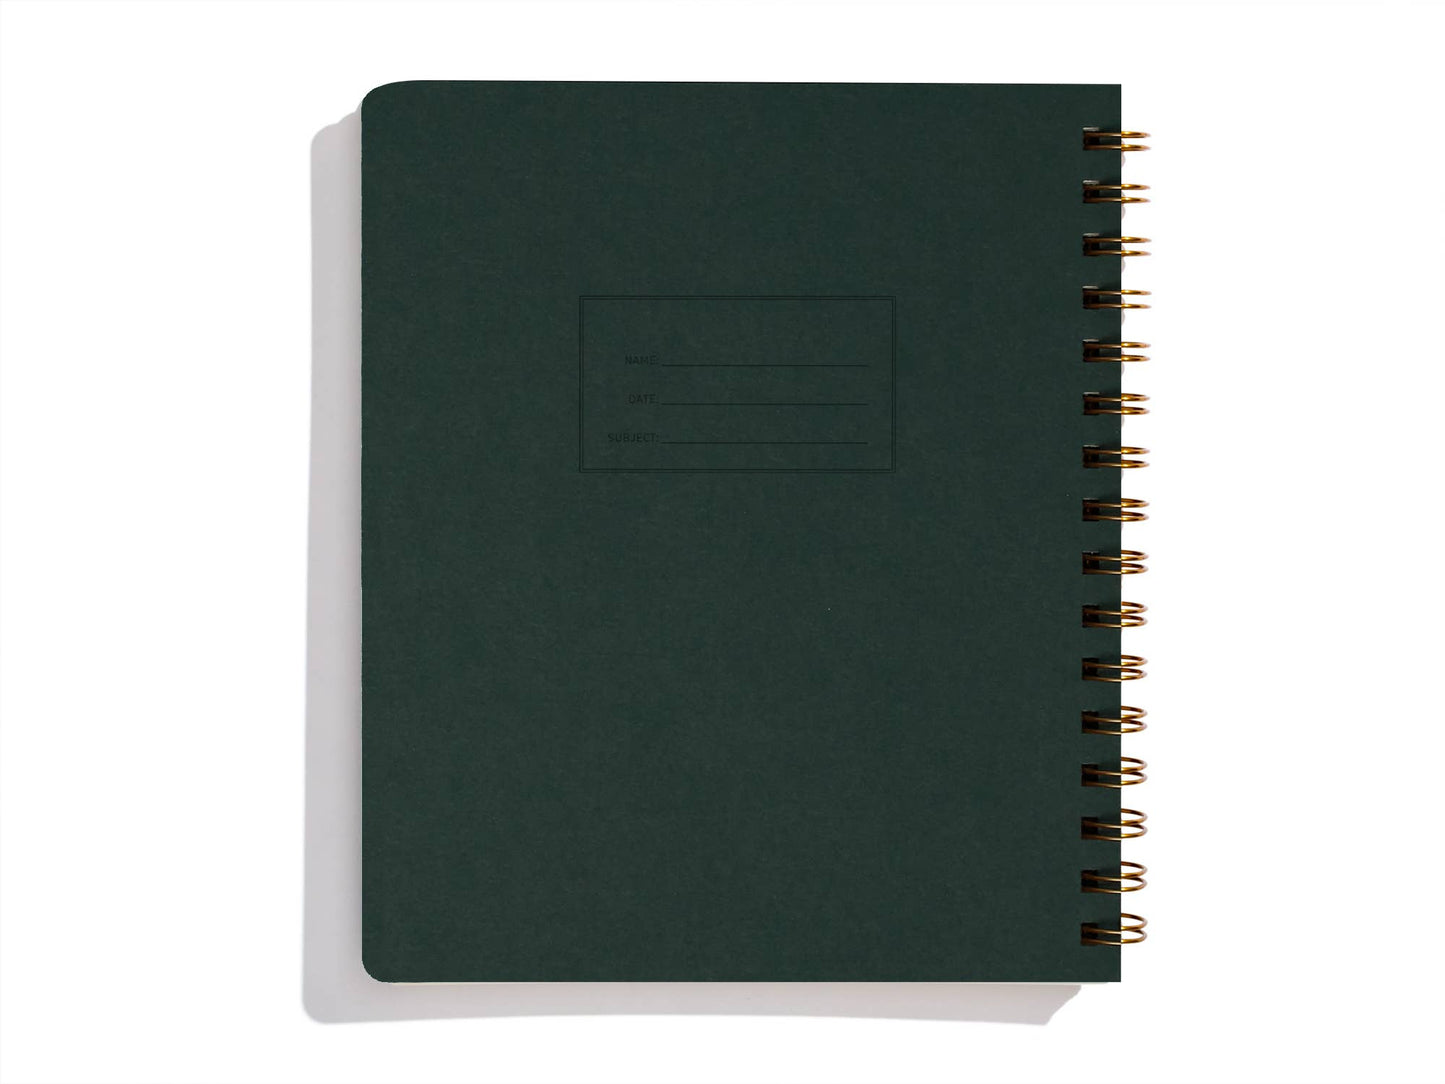 Lefty Standard Notebook - Solid Color Cover: Mint